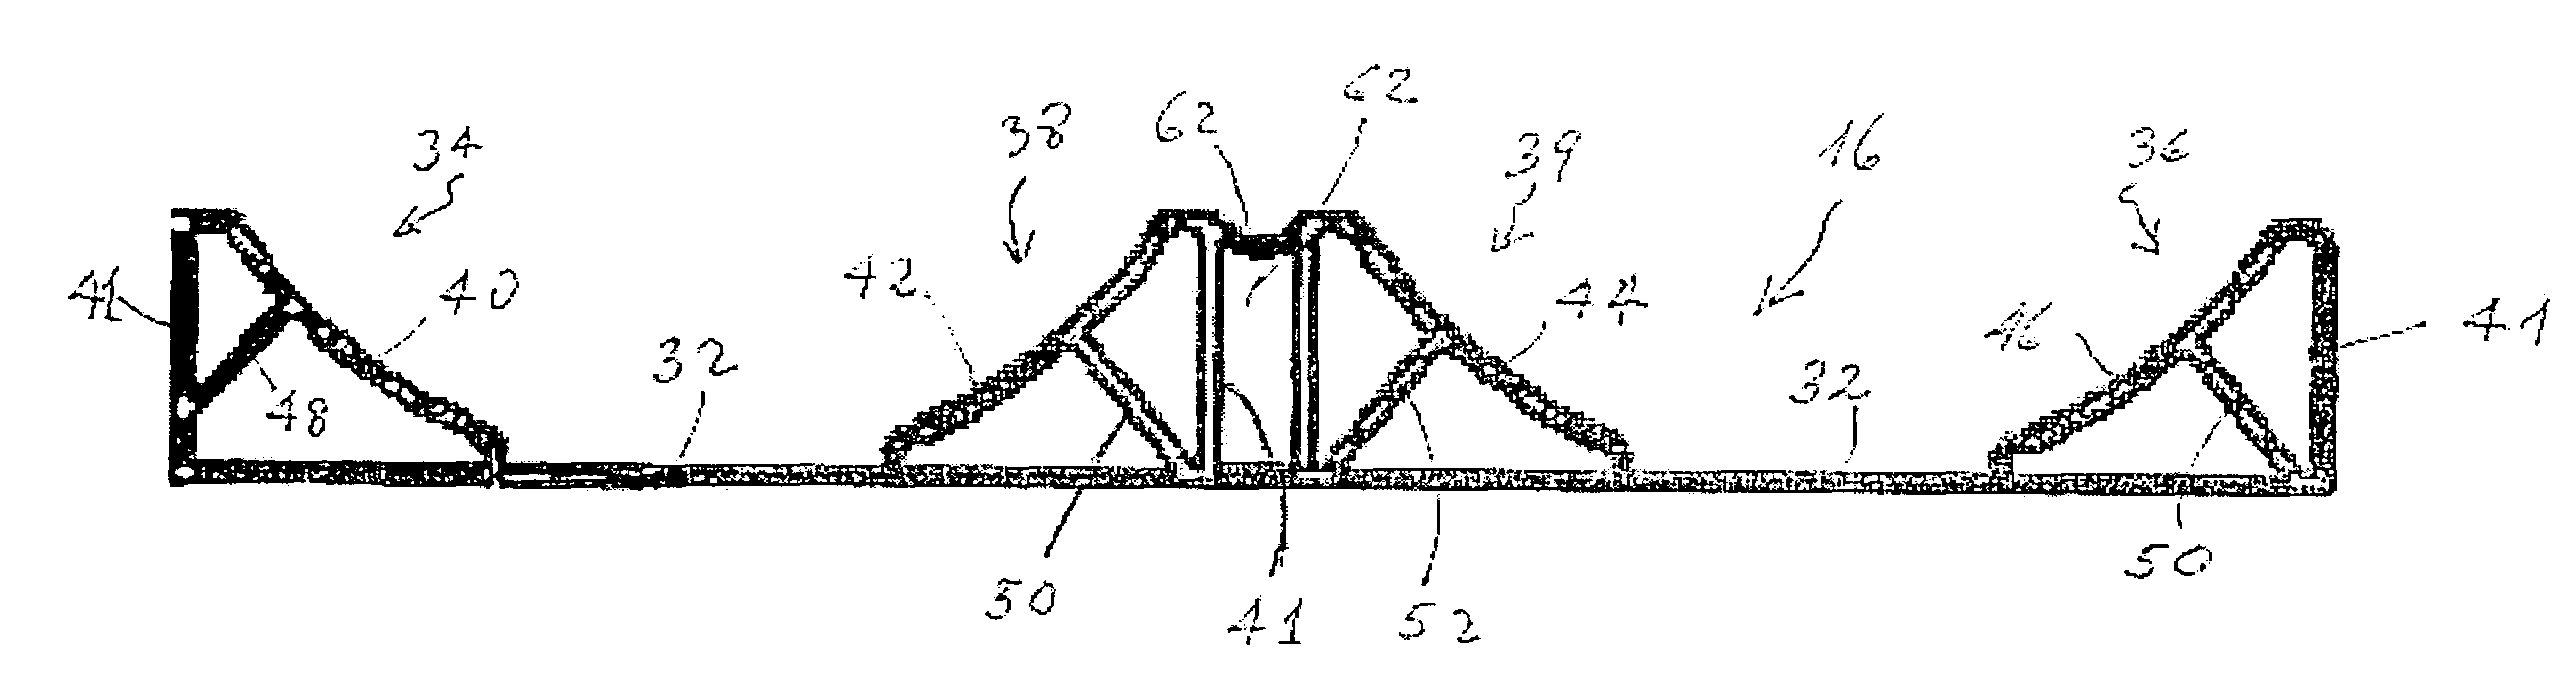 Roll stock cradle structure